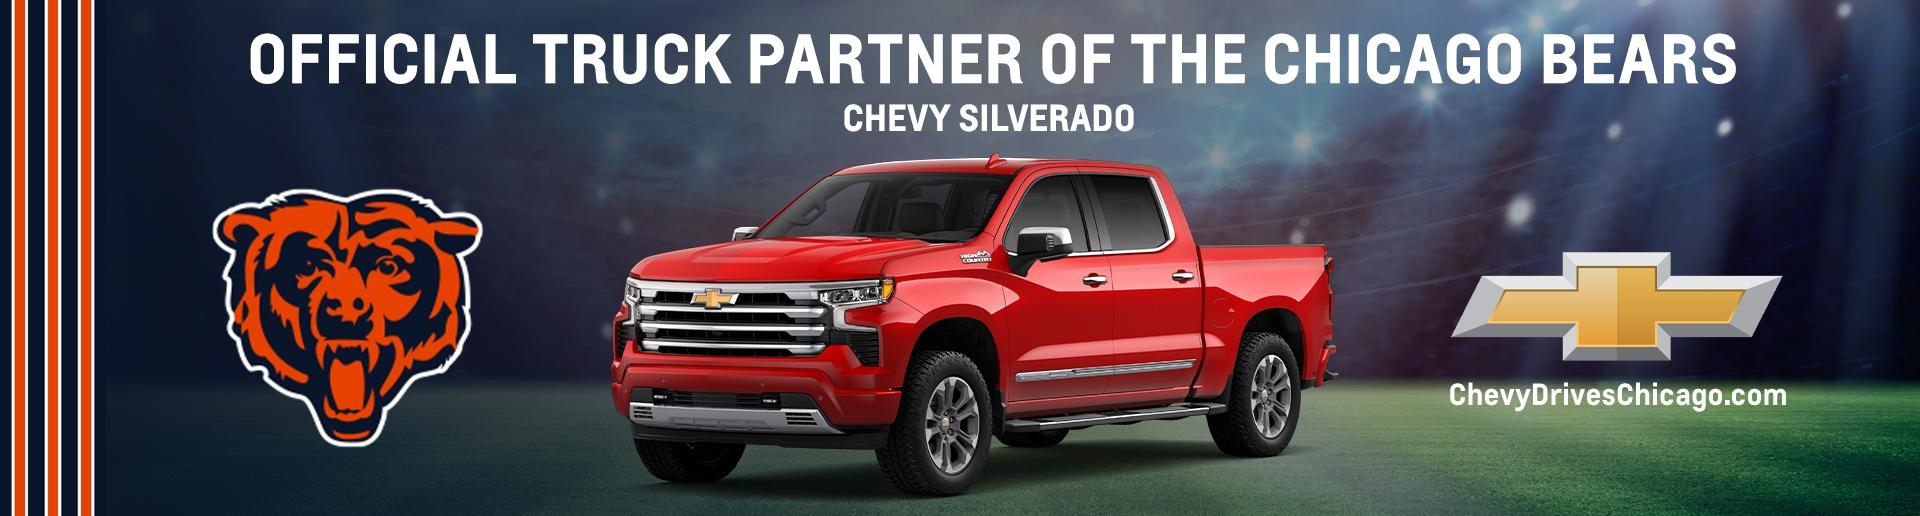 Official Partner of the Chicago Bears | Chevy Drives Chicago